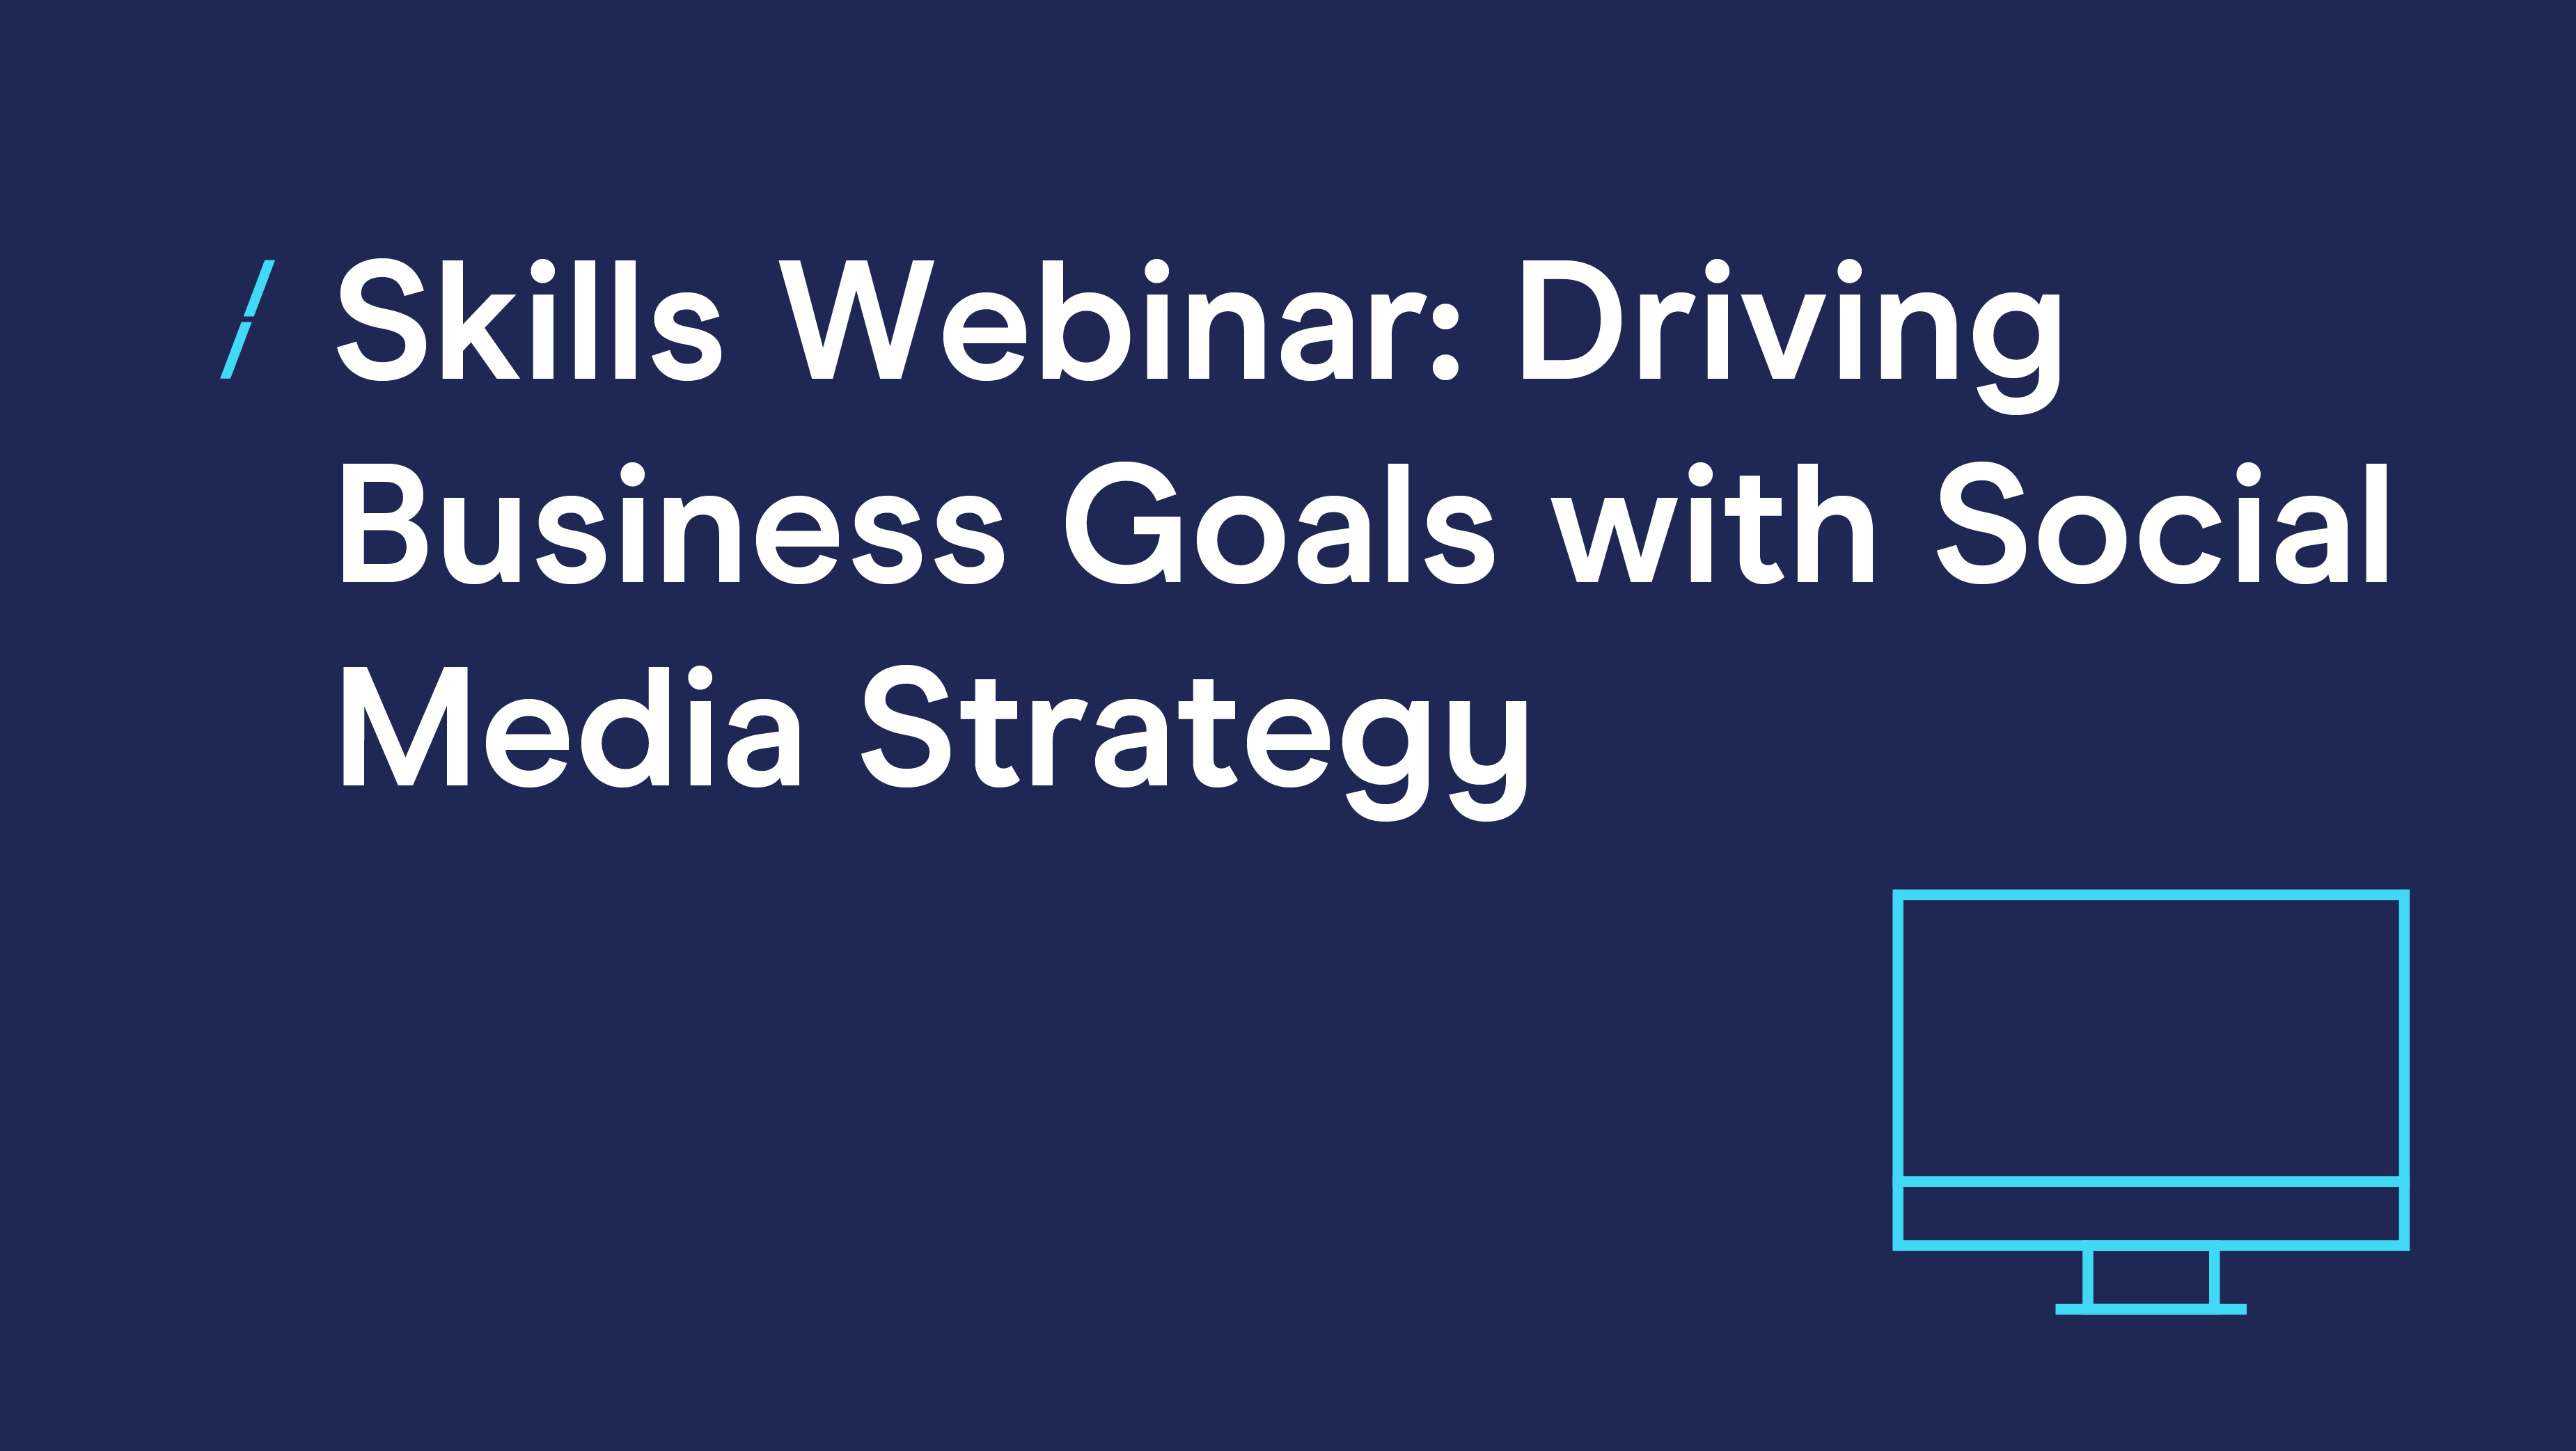 Skills Webinar- Driving Business Goals with Social Media Strategy.png